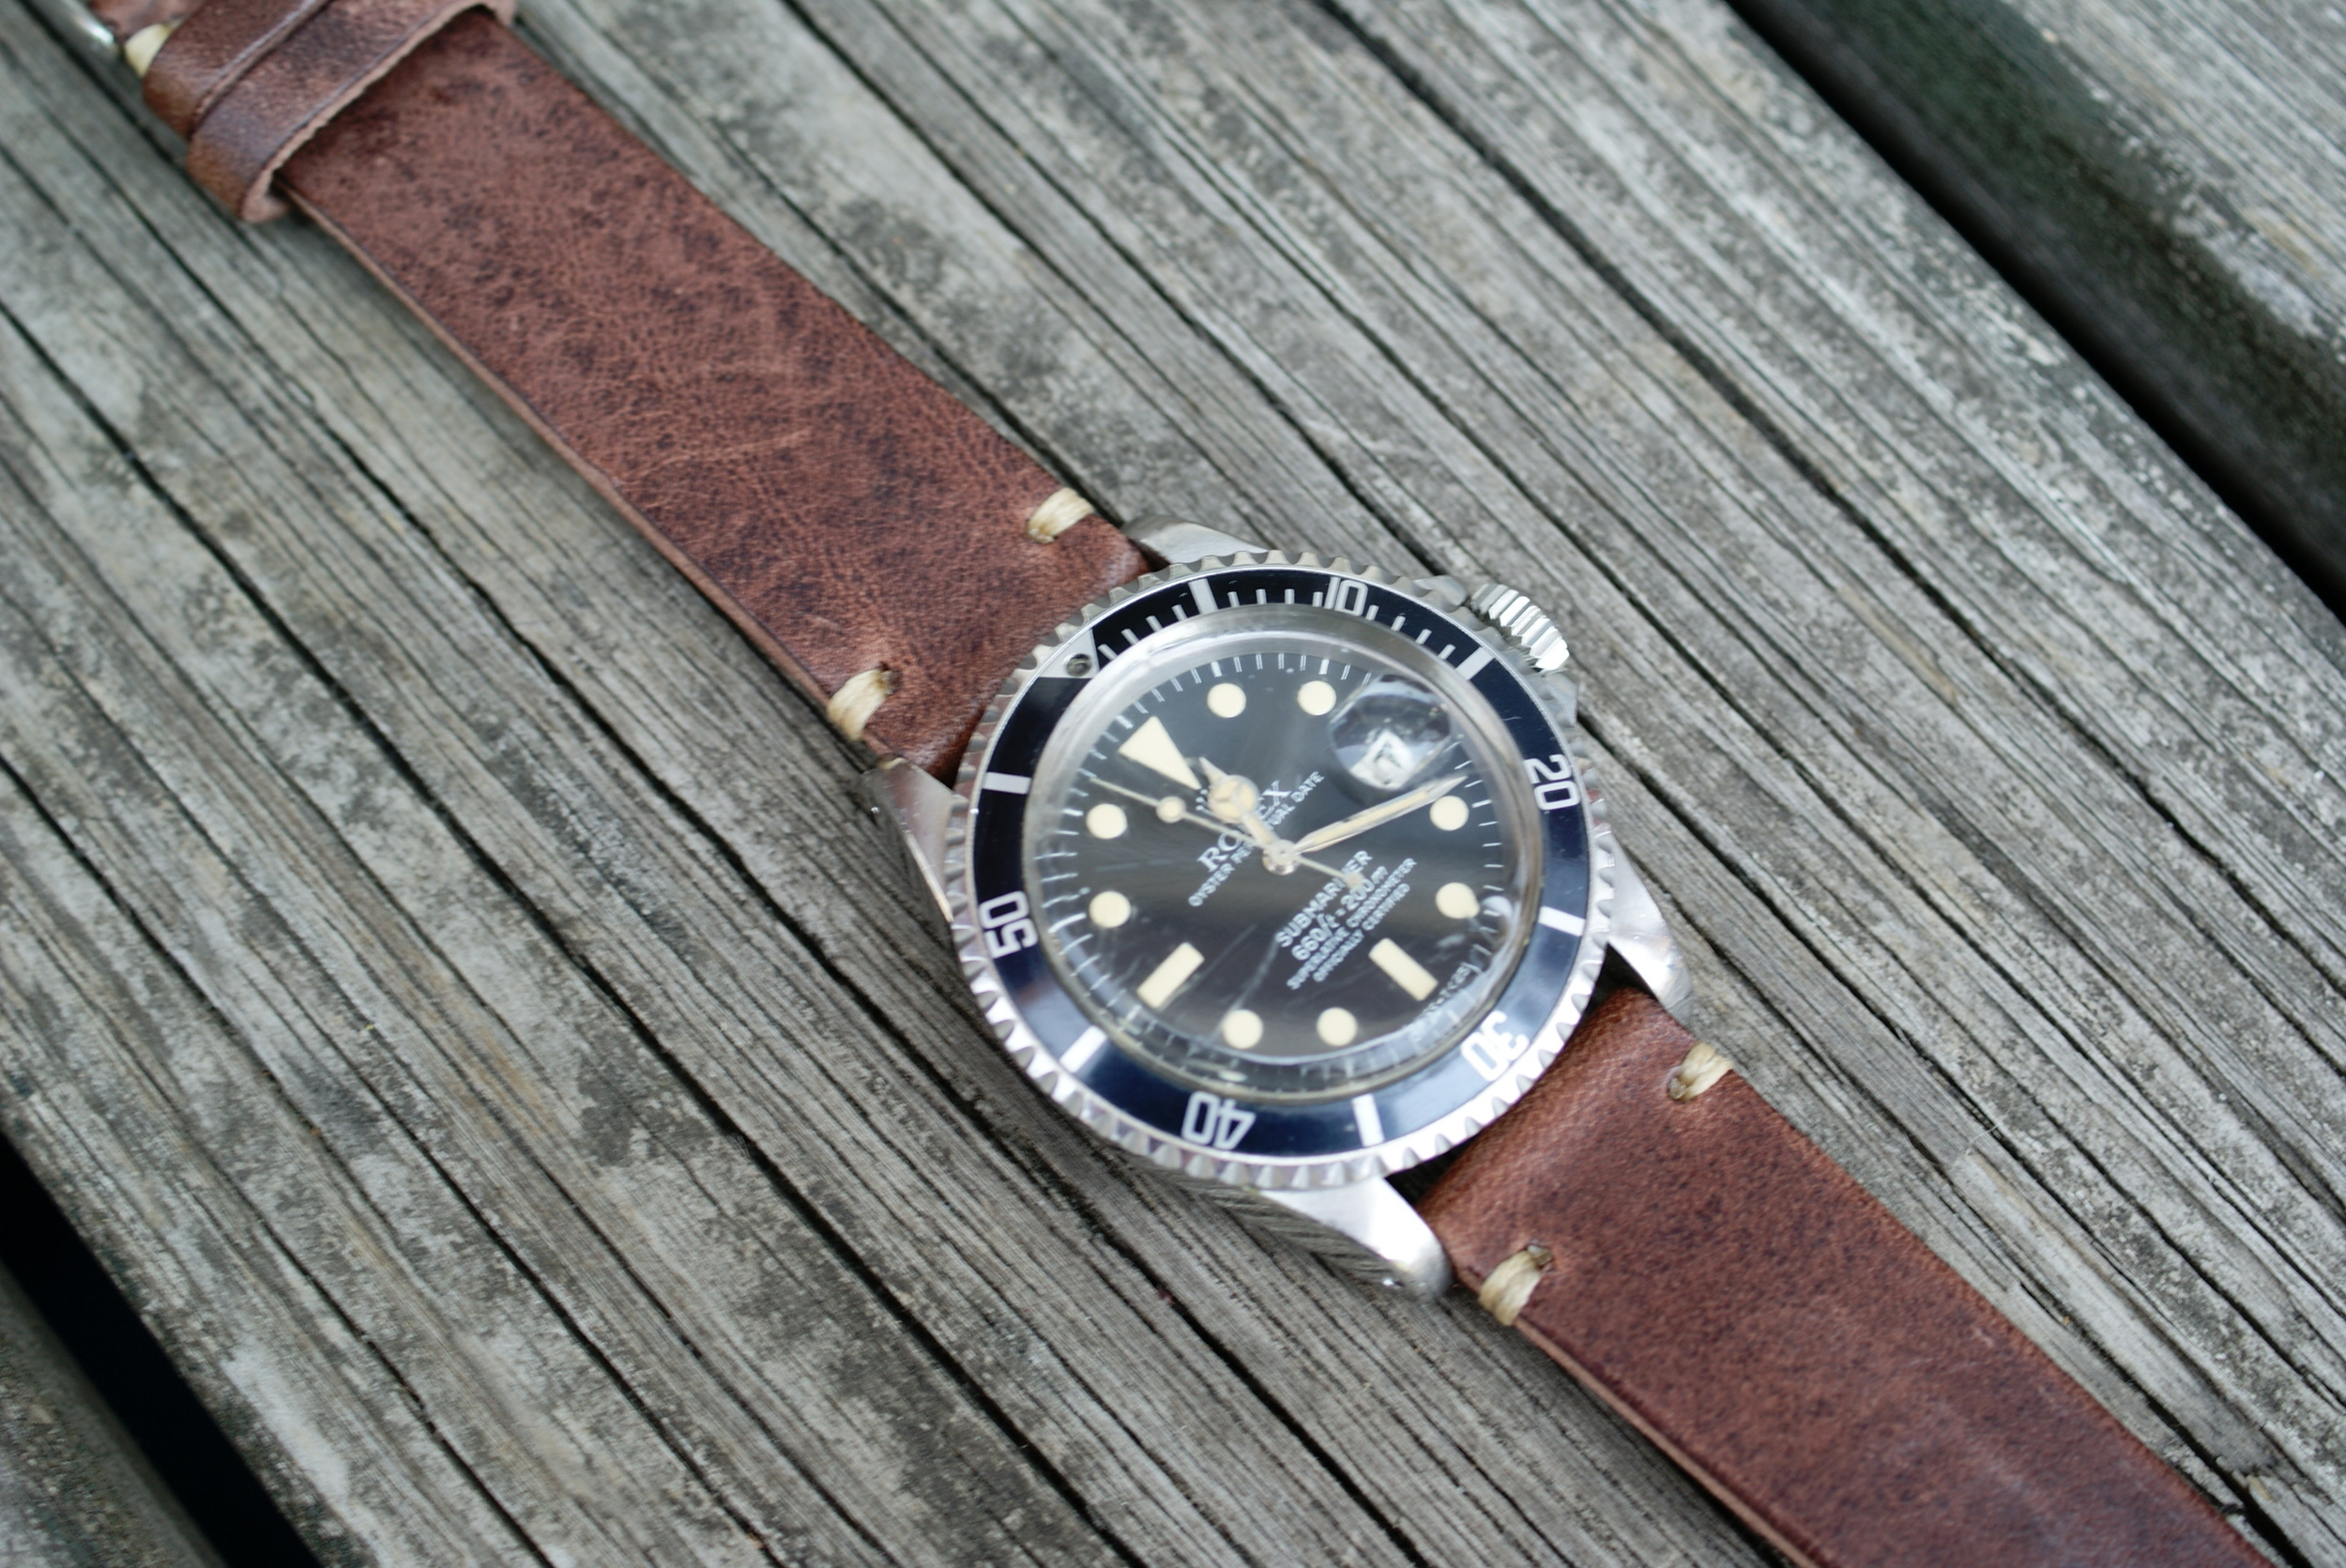 16610 leather strap